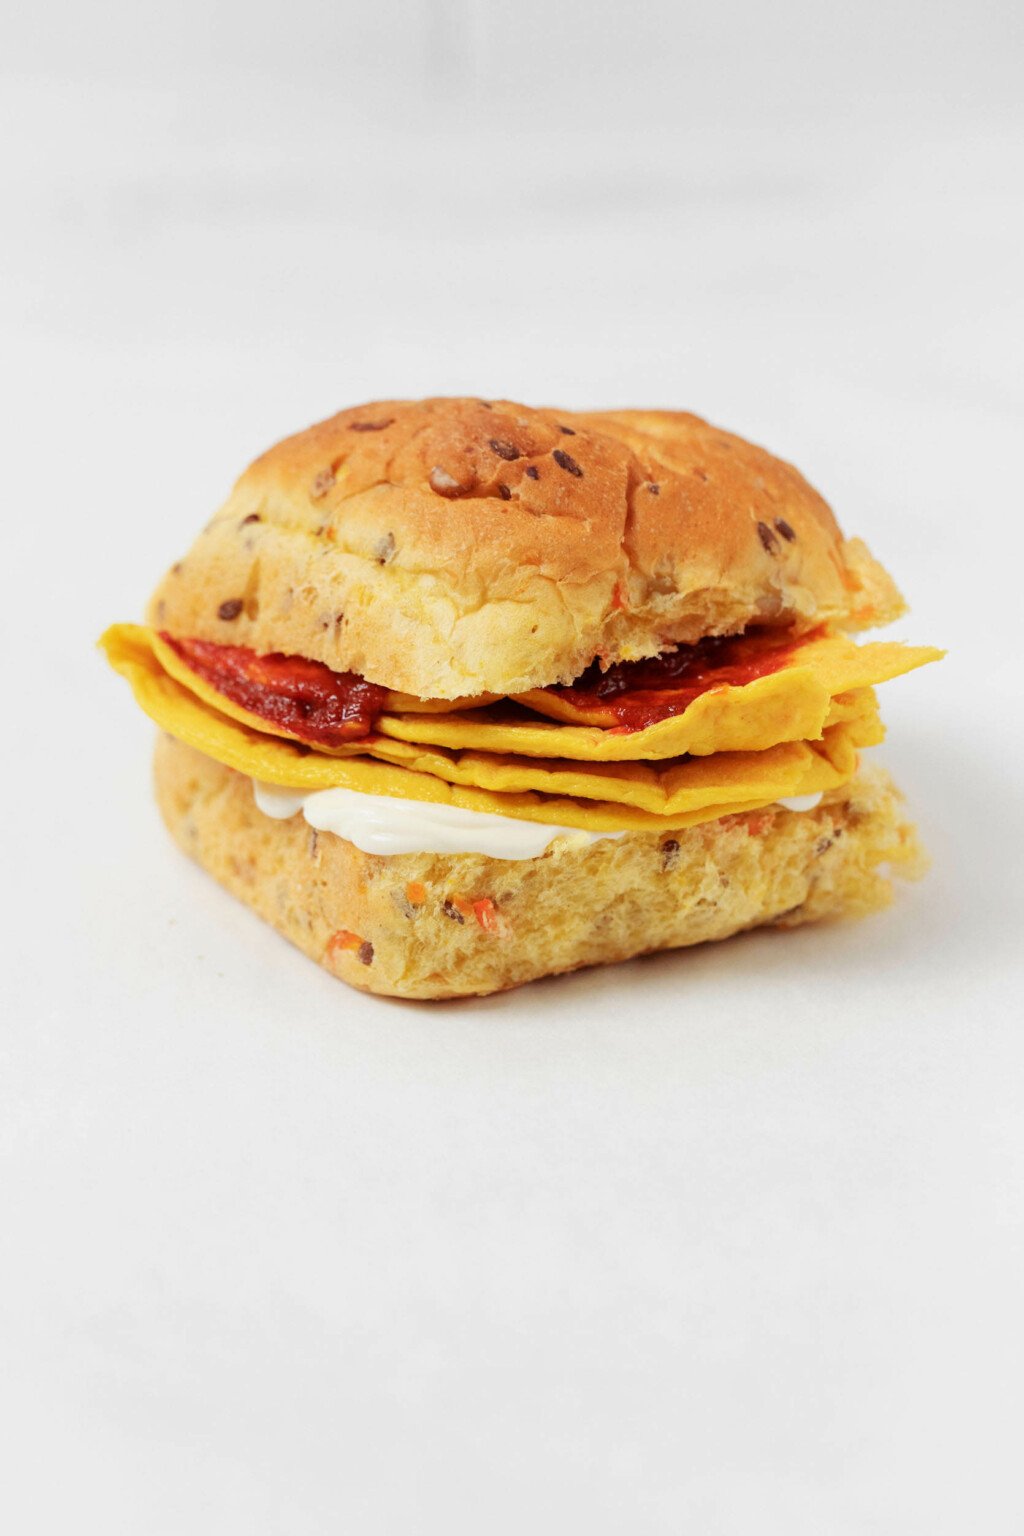 A breakfast sandwich on an herbed bun is resting on a white surface.